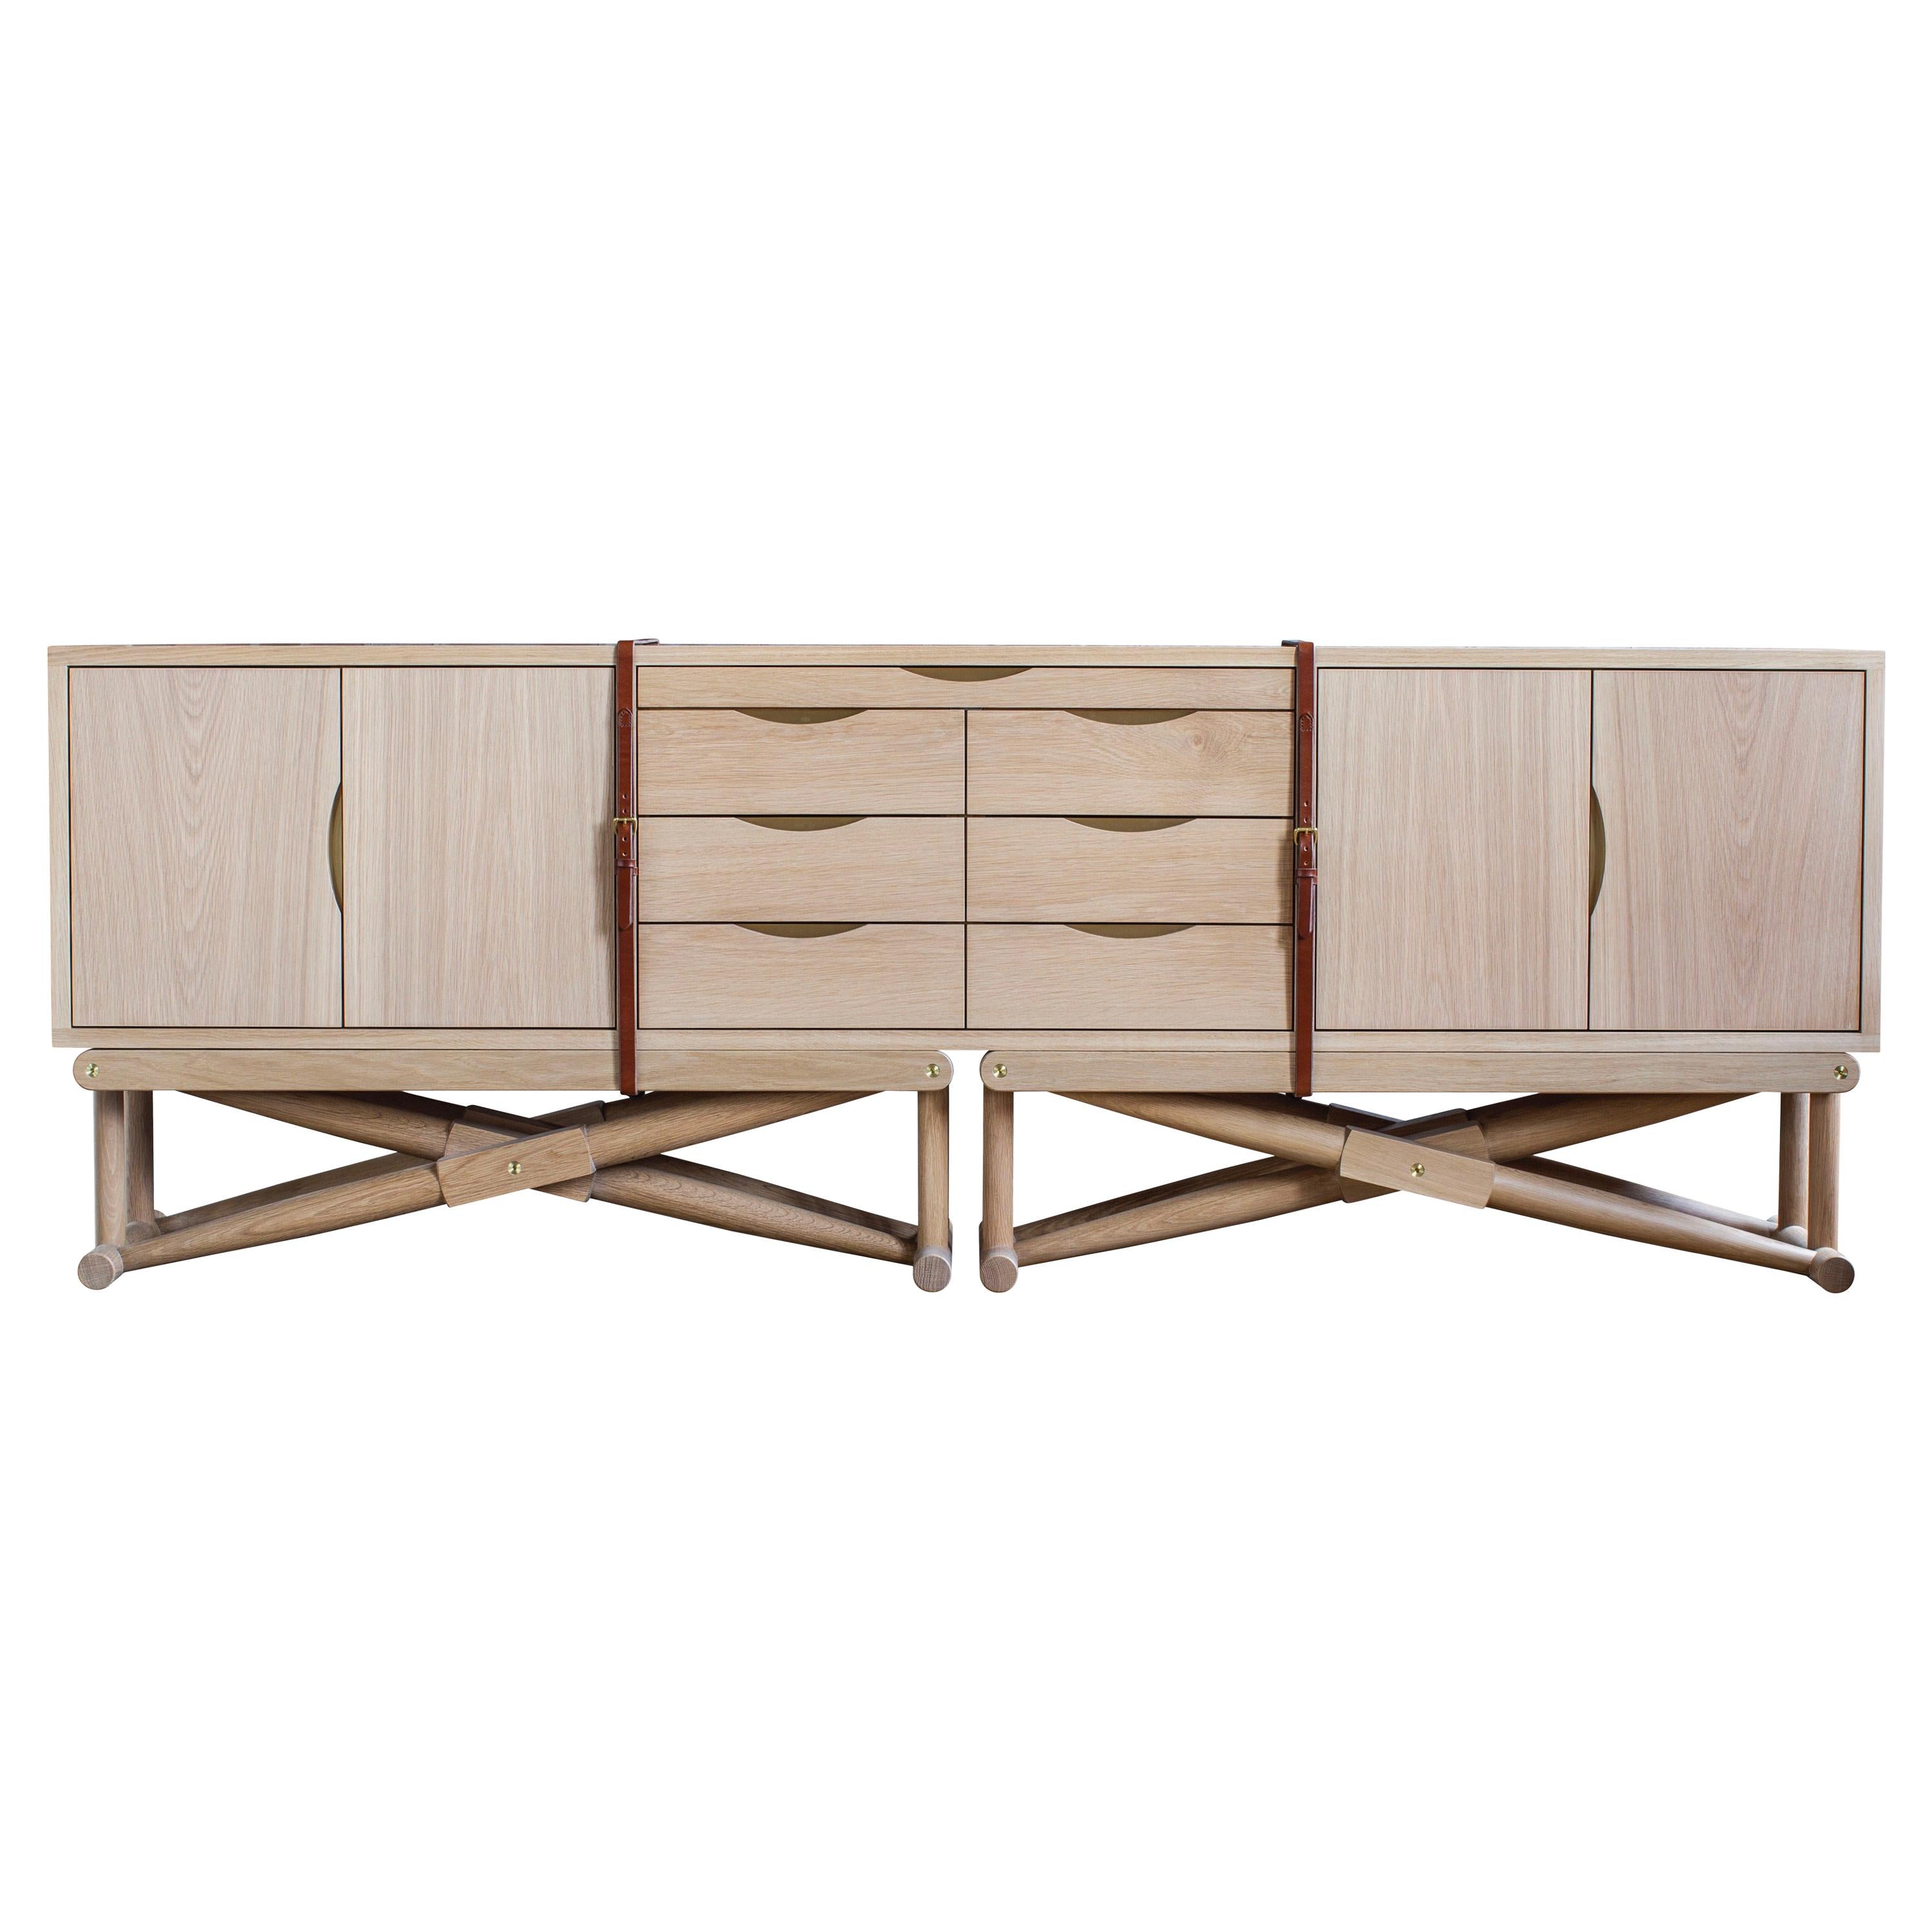 Ingram Console in White Oak - handcrafted by Richard Wrightman Design